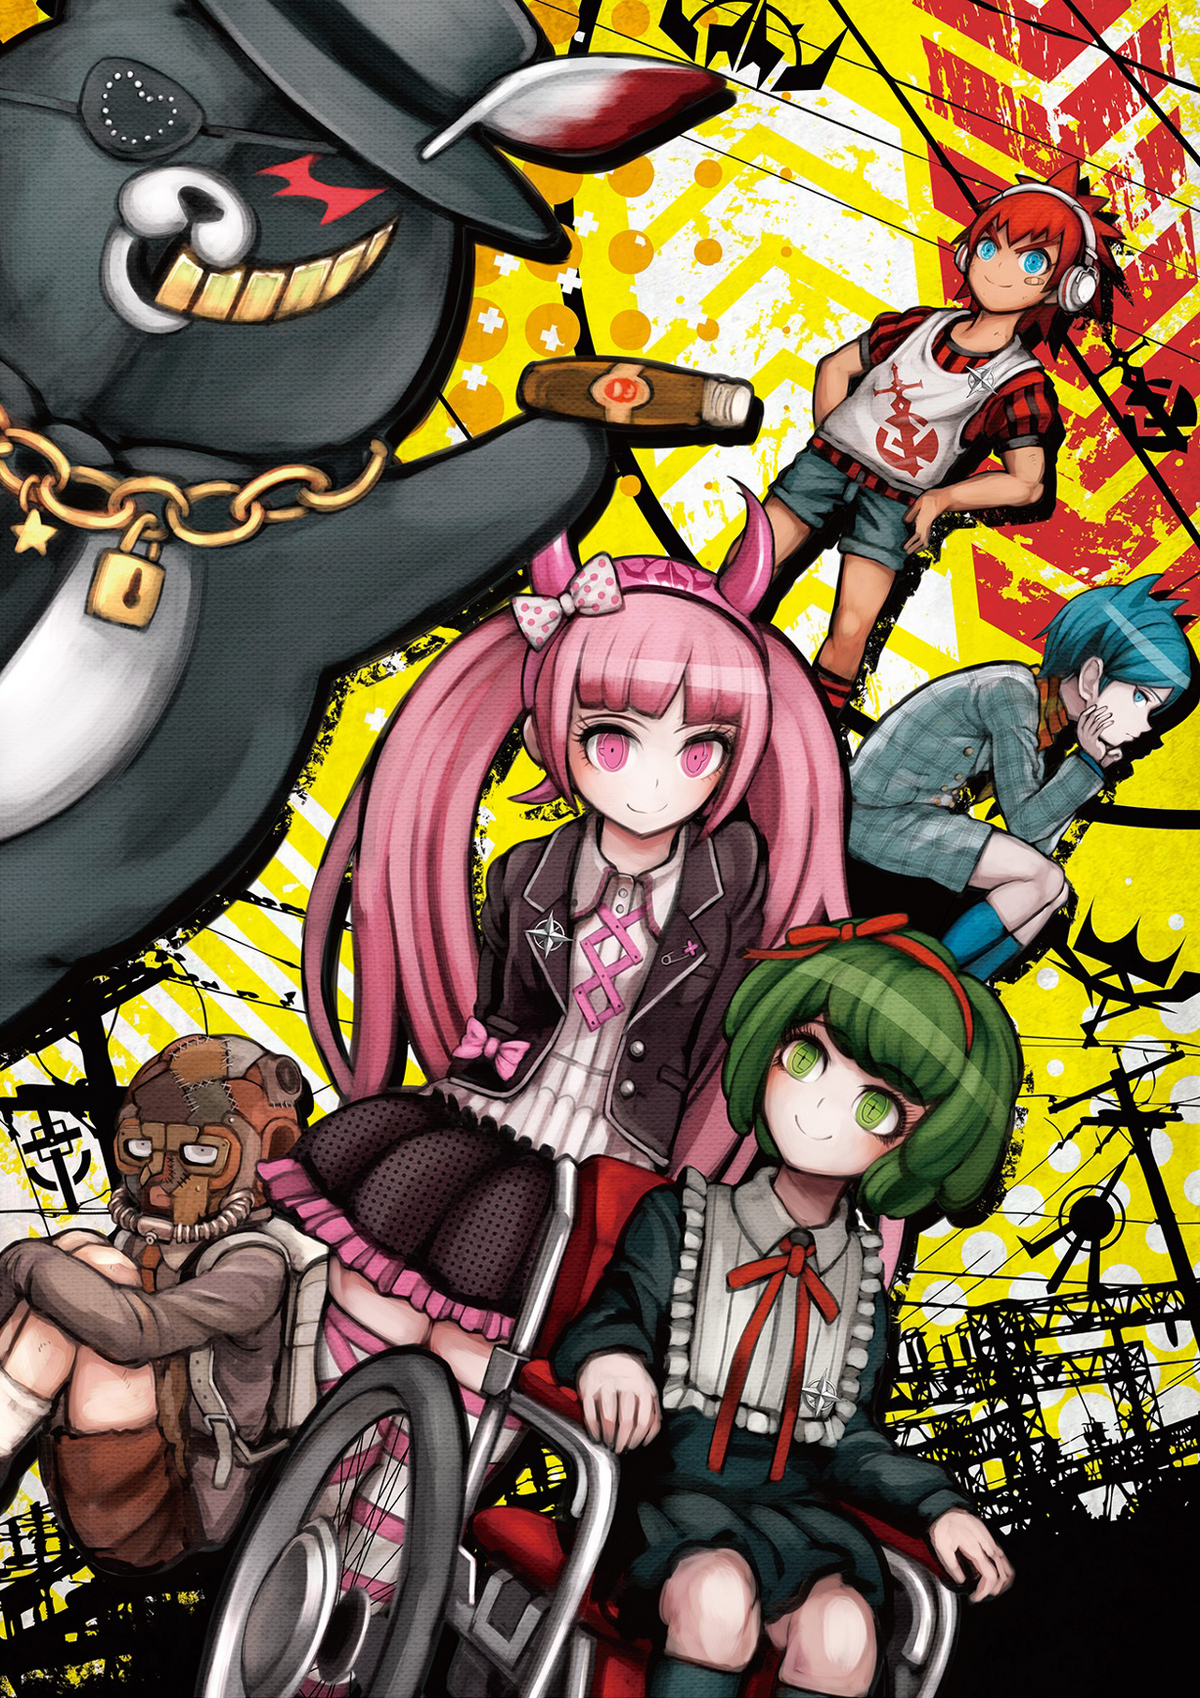 Danganronpa another another despair. Данганронпа another Episode. Воины надежды Danganronpa. Данганронпа герлз. Данганронпа дети.